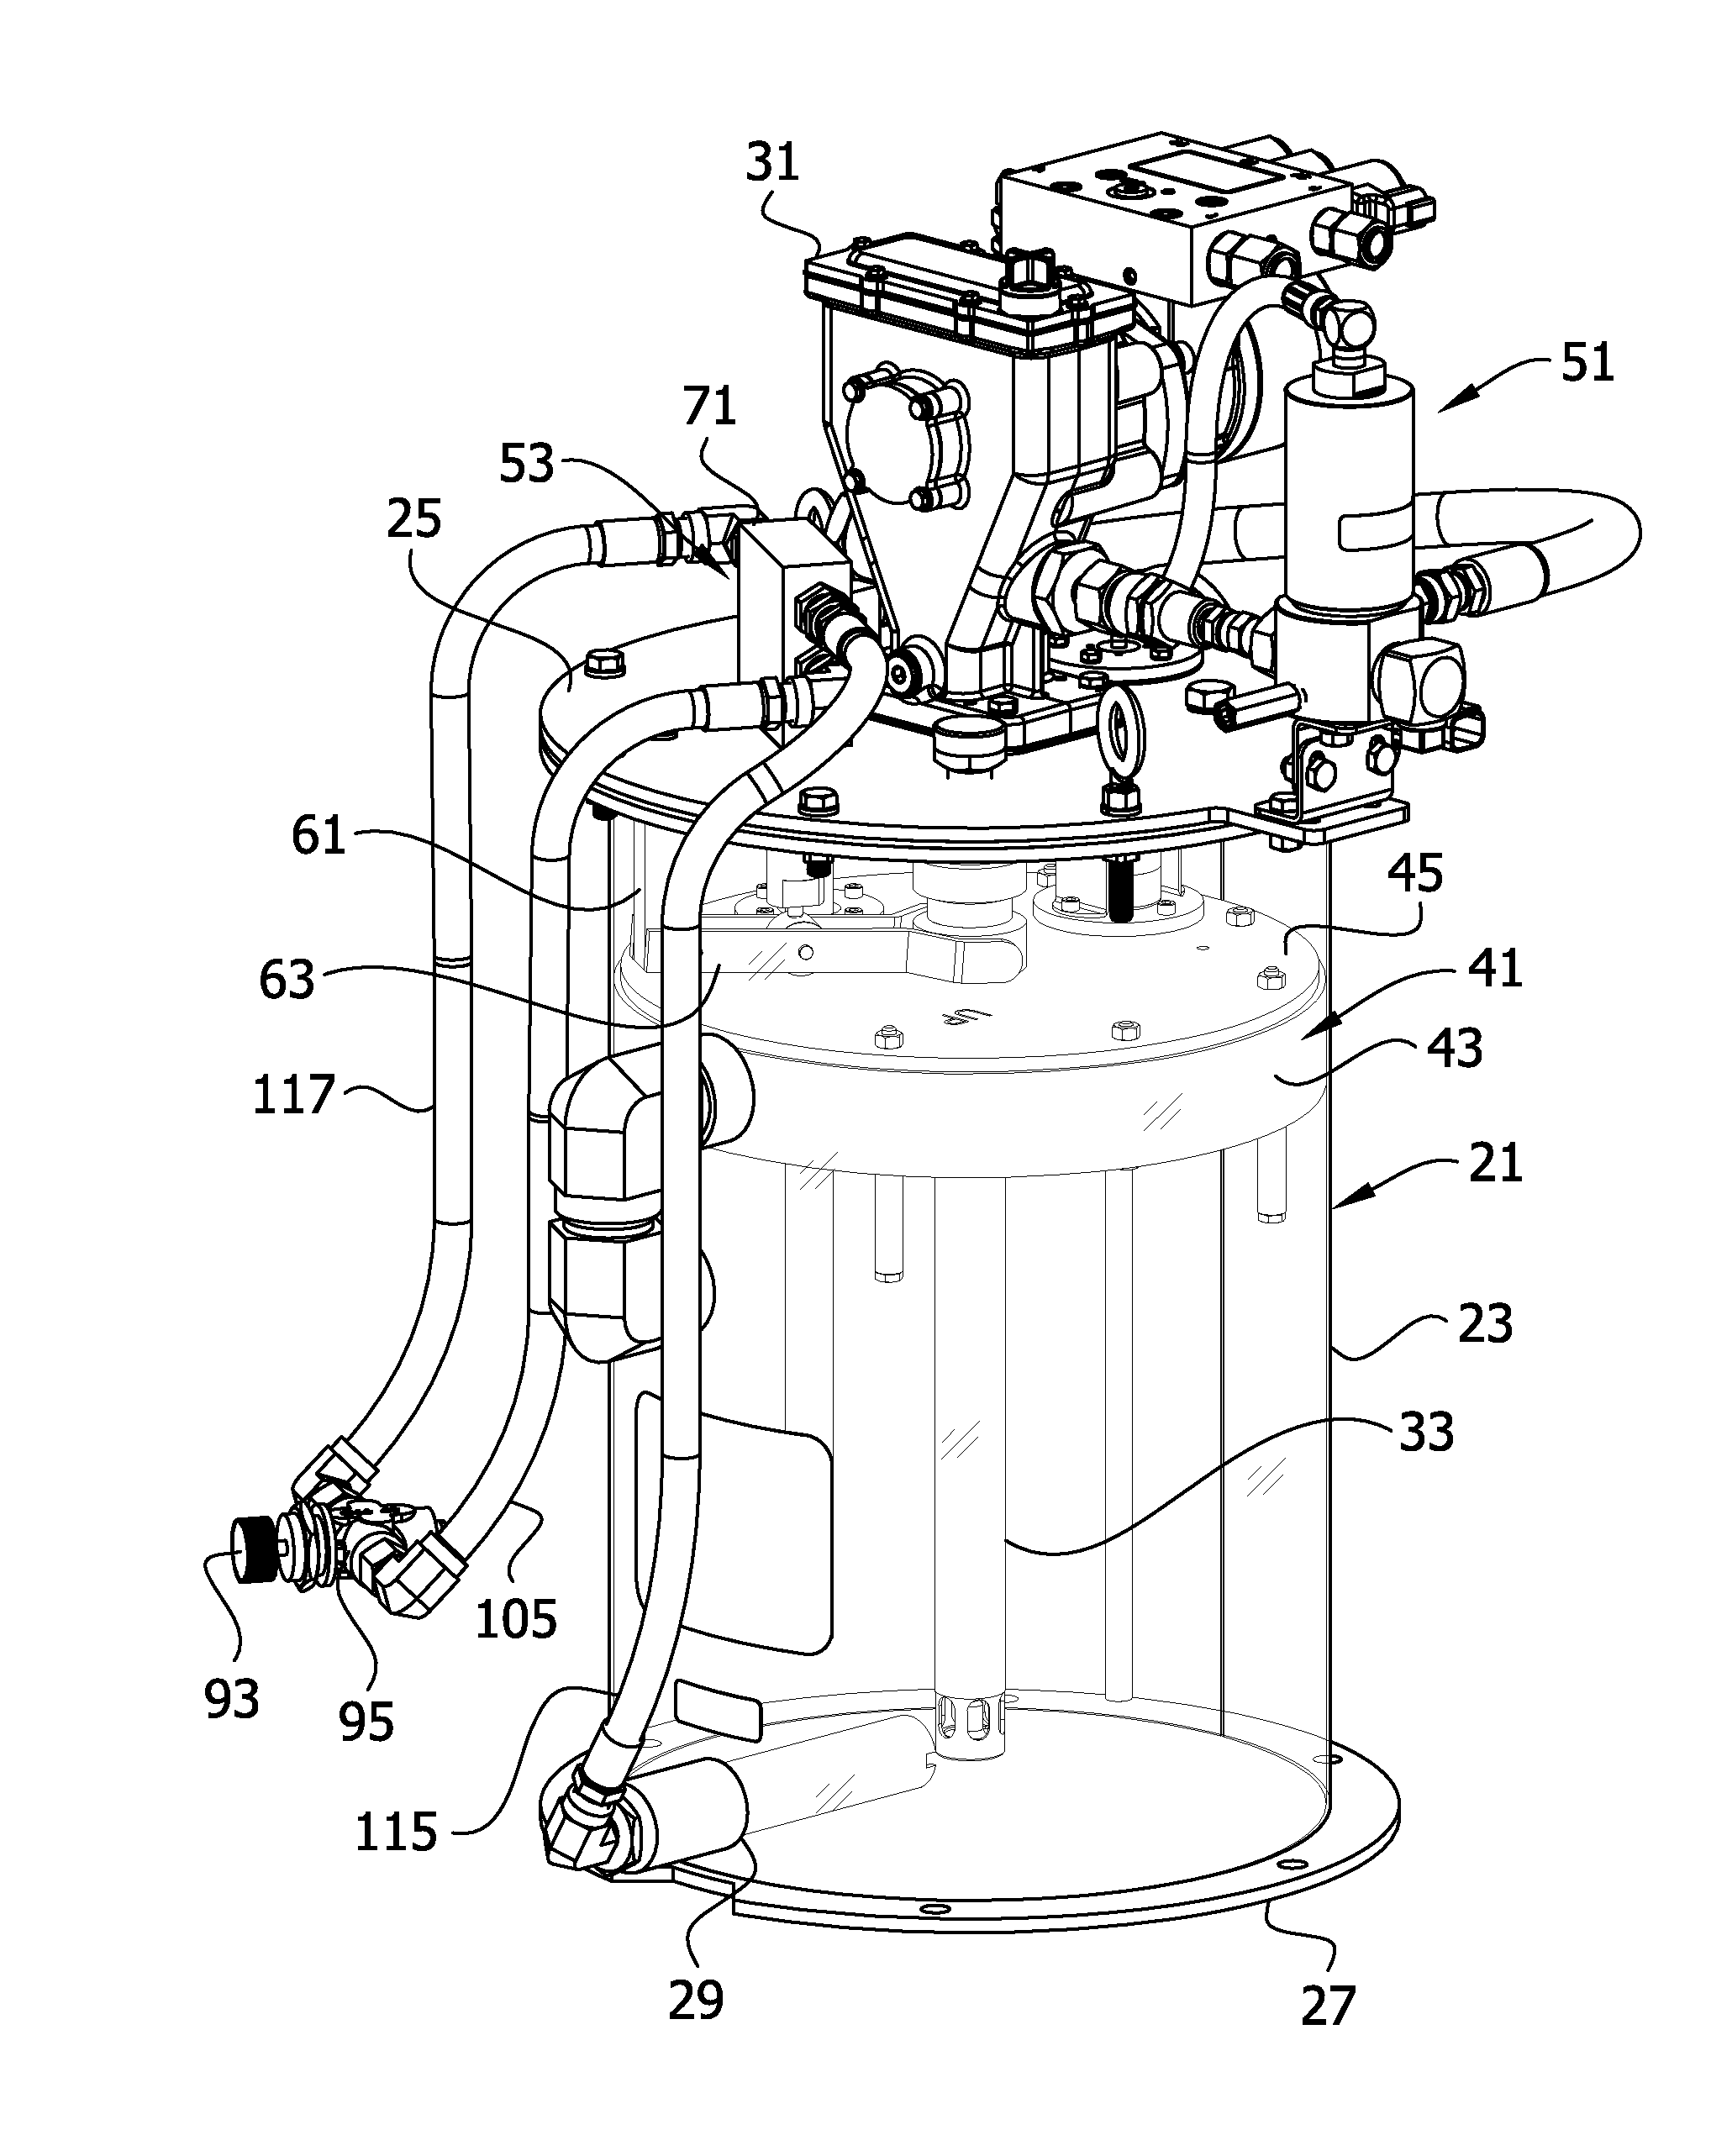 Lubricant reservoir refilling system with shut-off